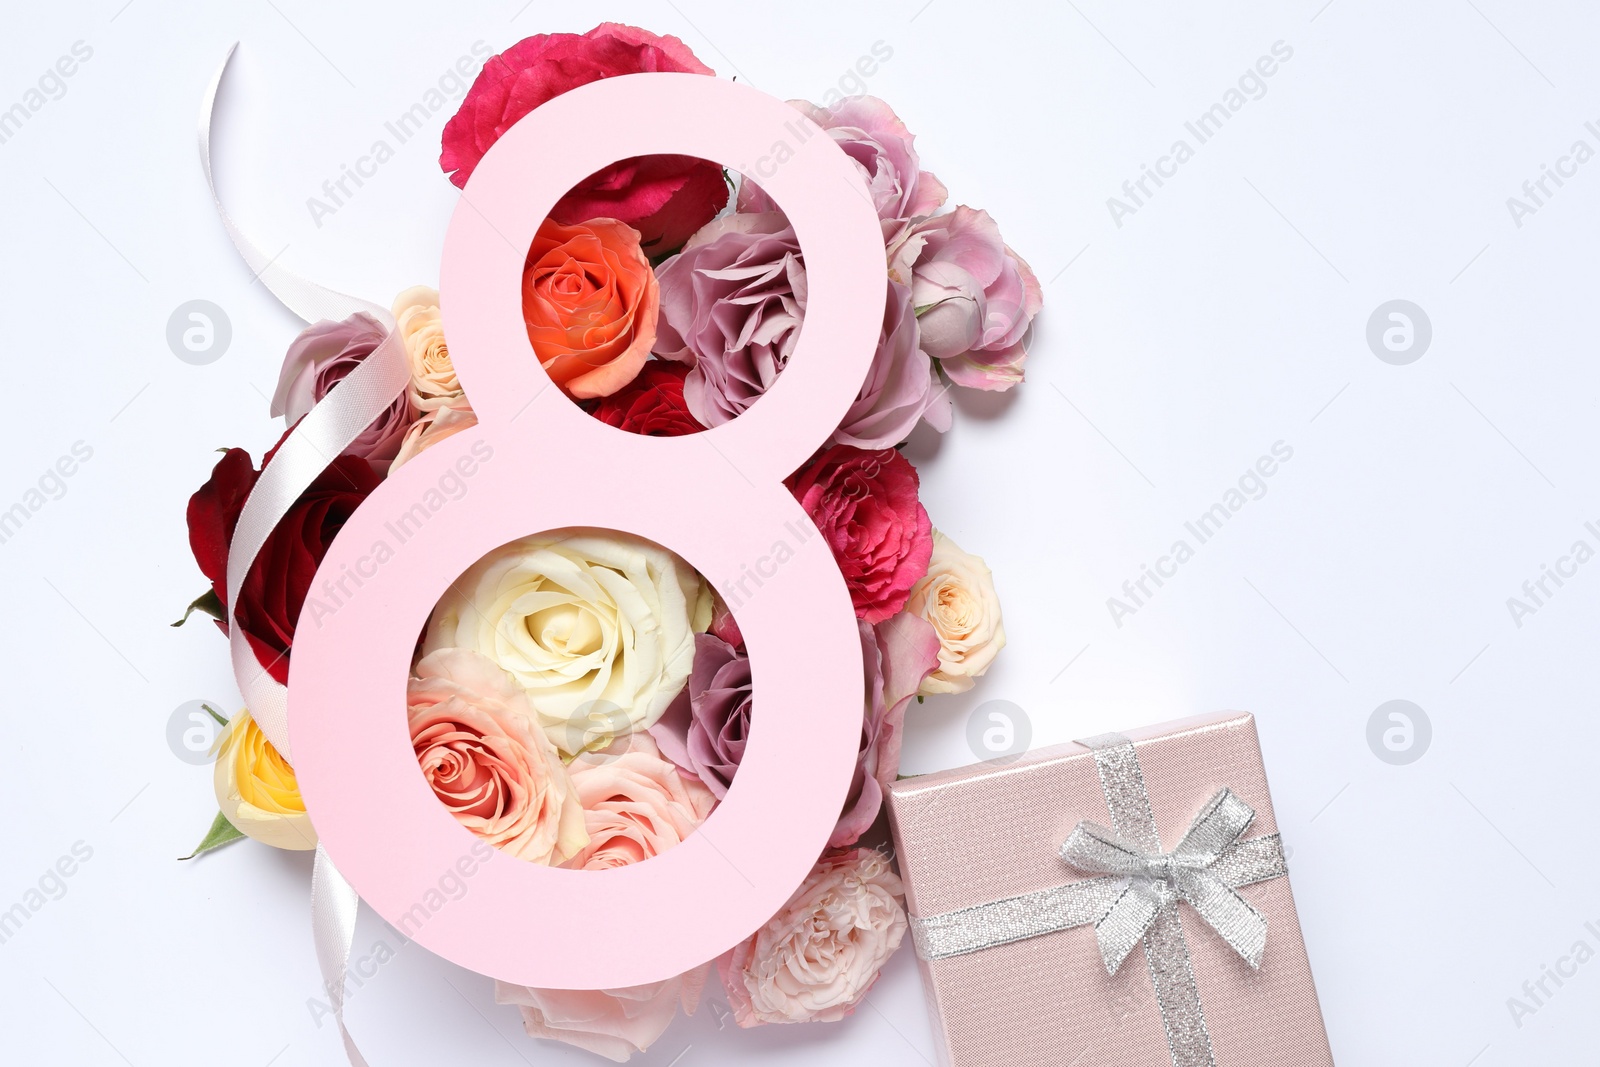 Photo of 8 March greeting card design with roses and gift box on white background, top view. Happy International Women's Day